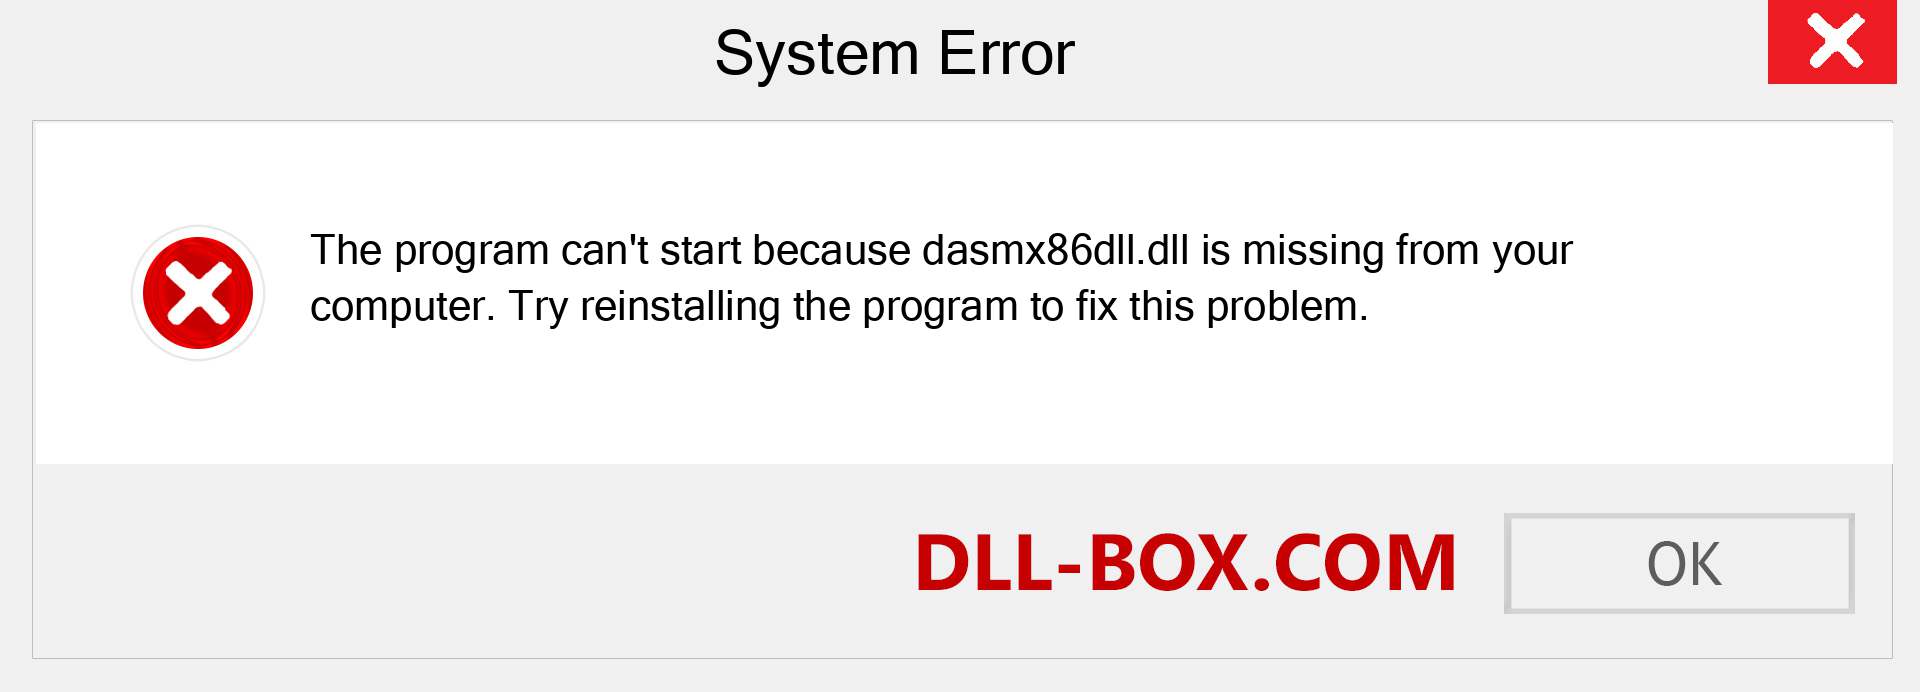  dasmx86dll.dll file is missing?. Download for Windows 7, 8, 10 - Fix  dasmx86dll dll Missing Error on Windows, photos, images